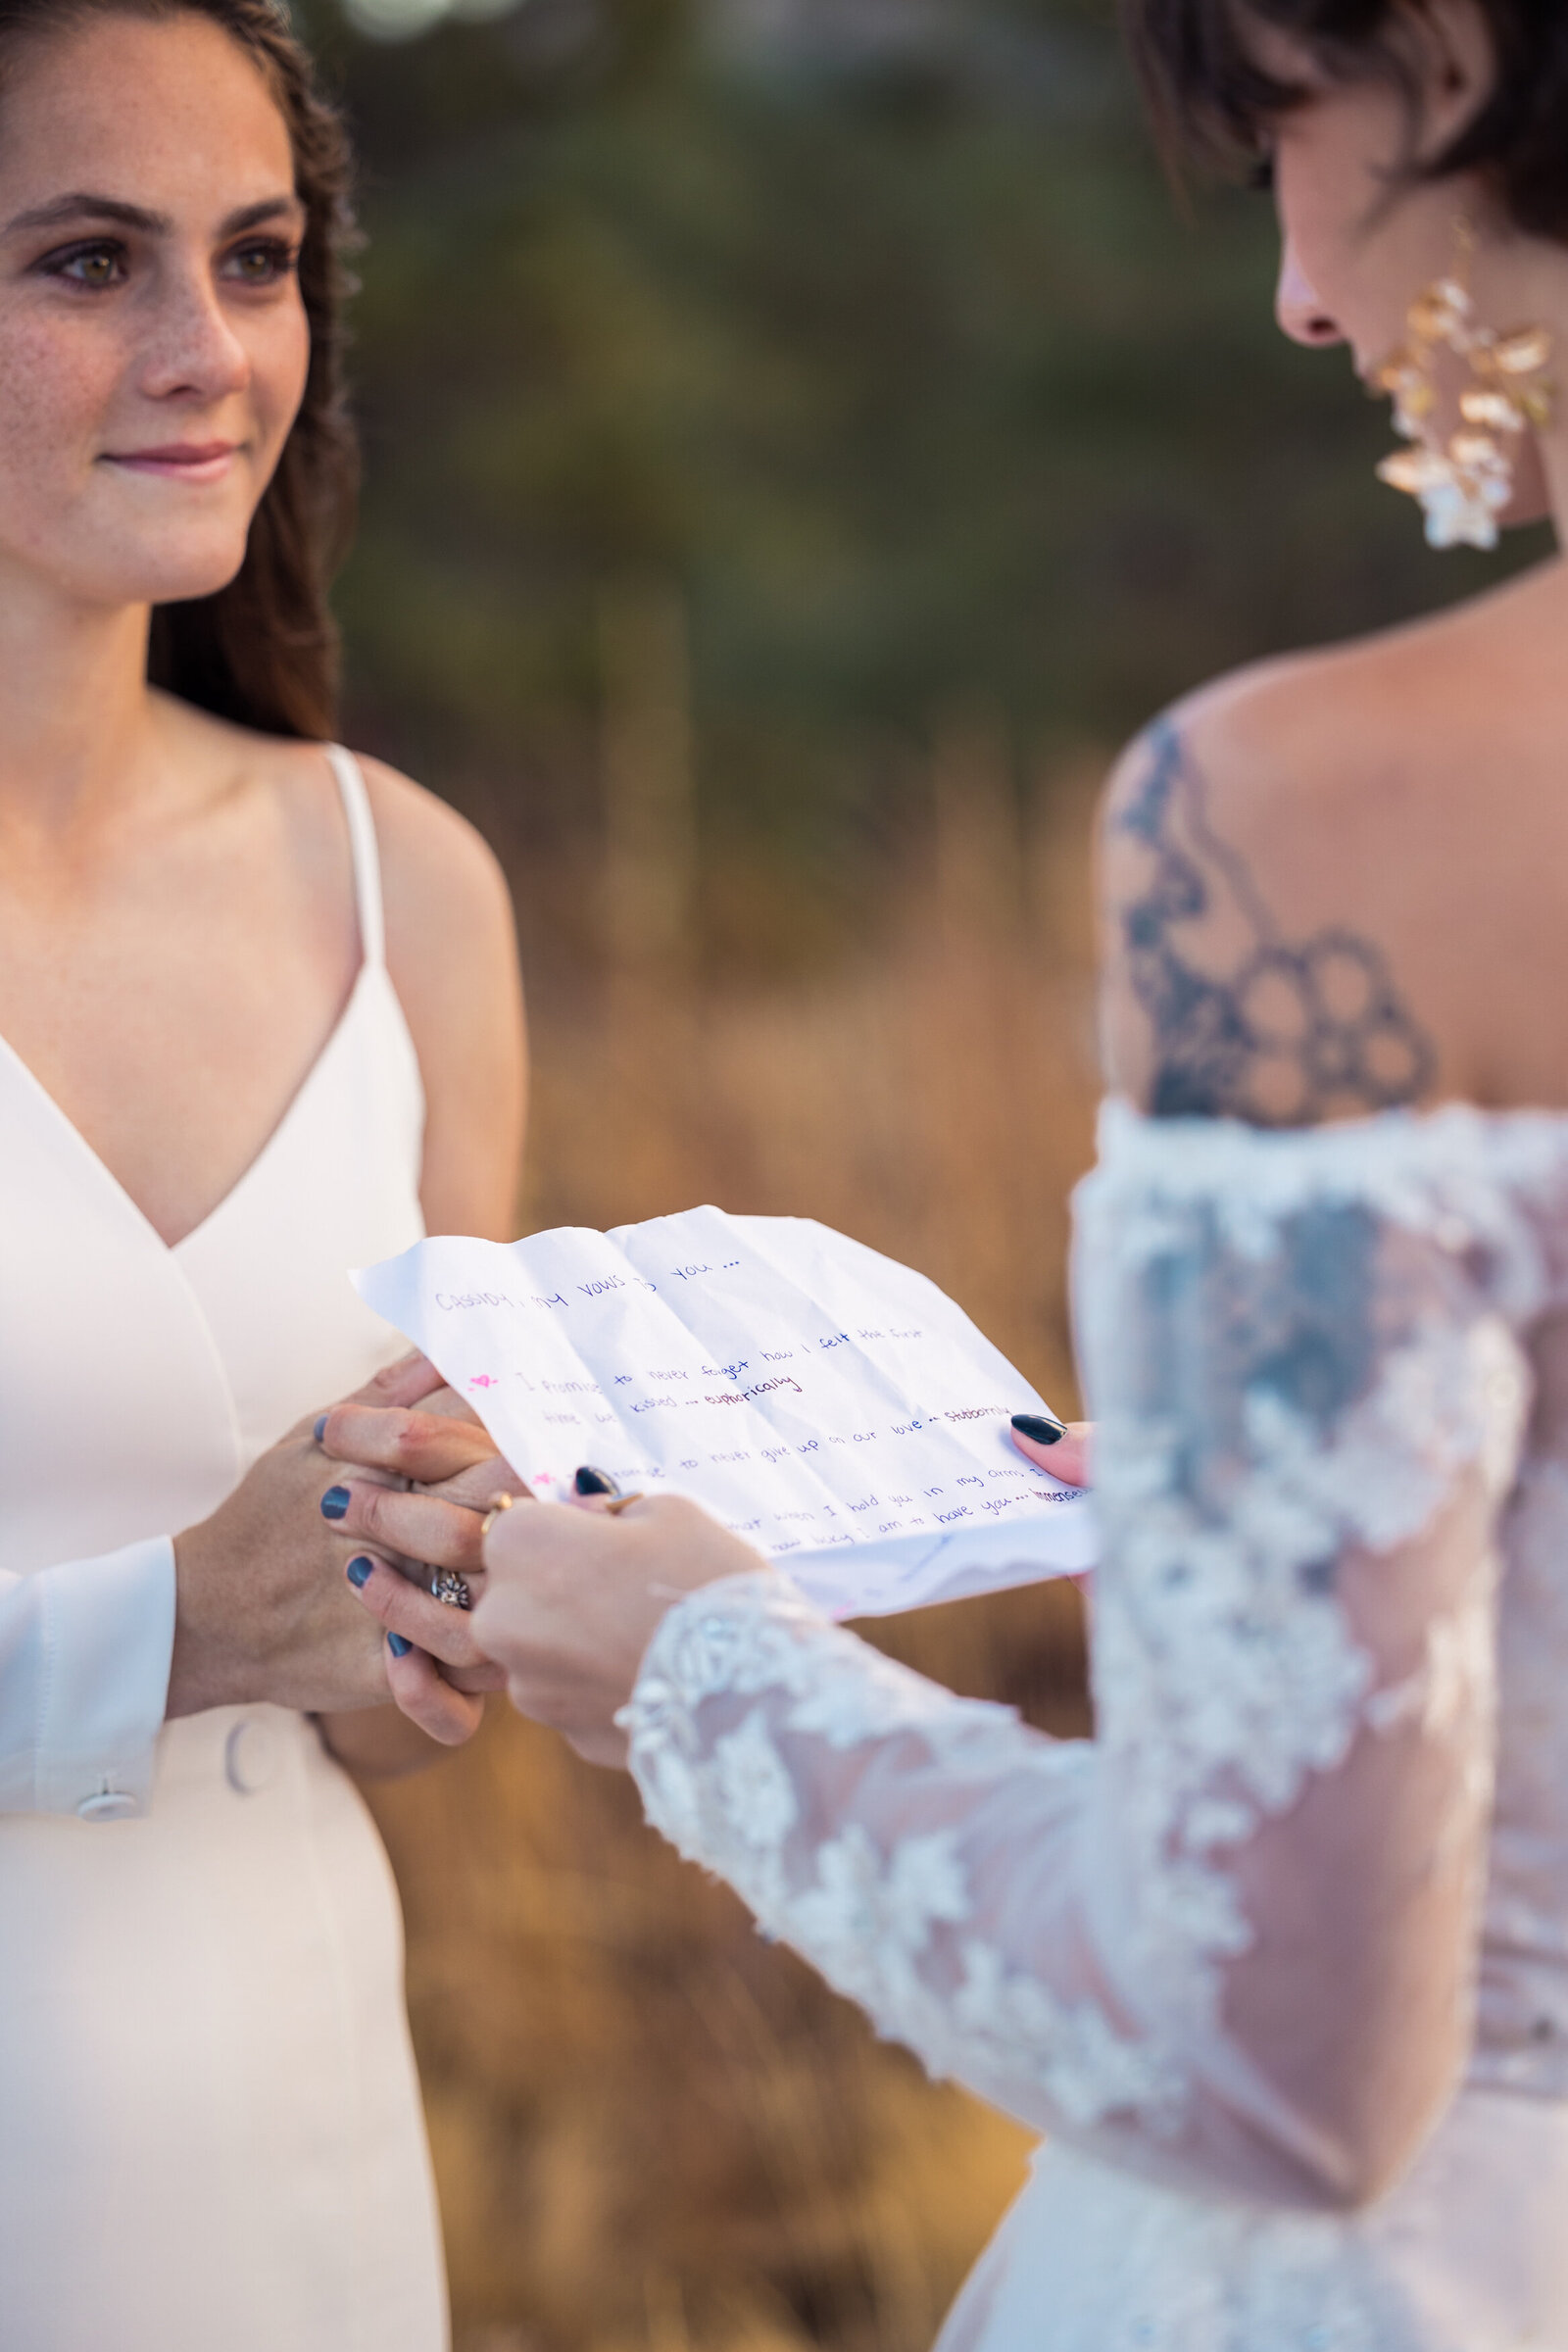 hand written vows being read during a wedding ceremony